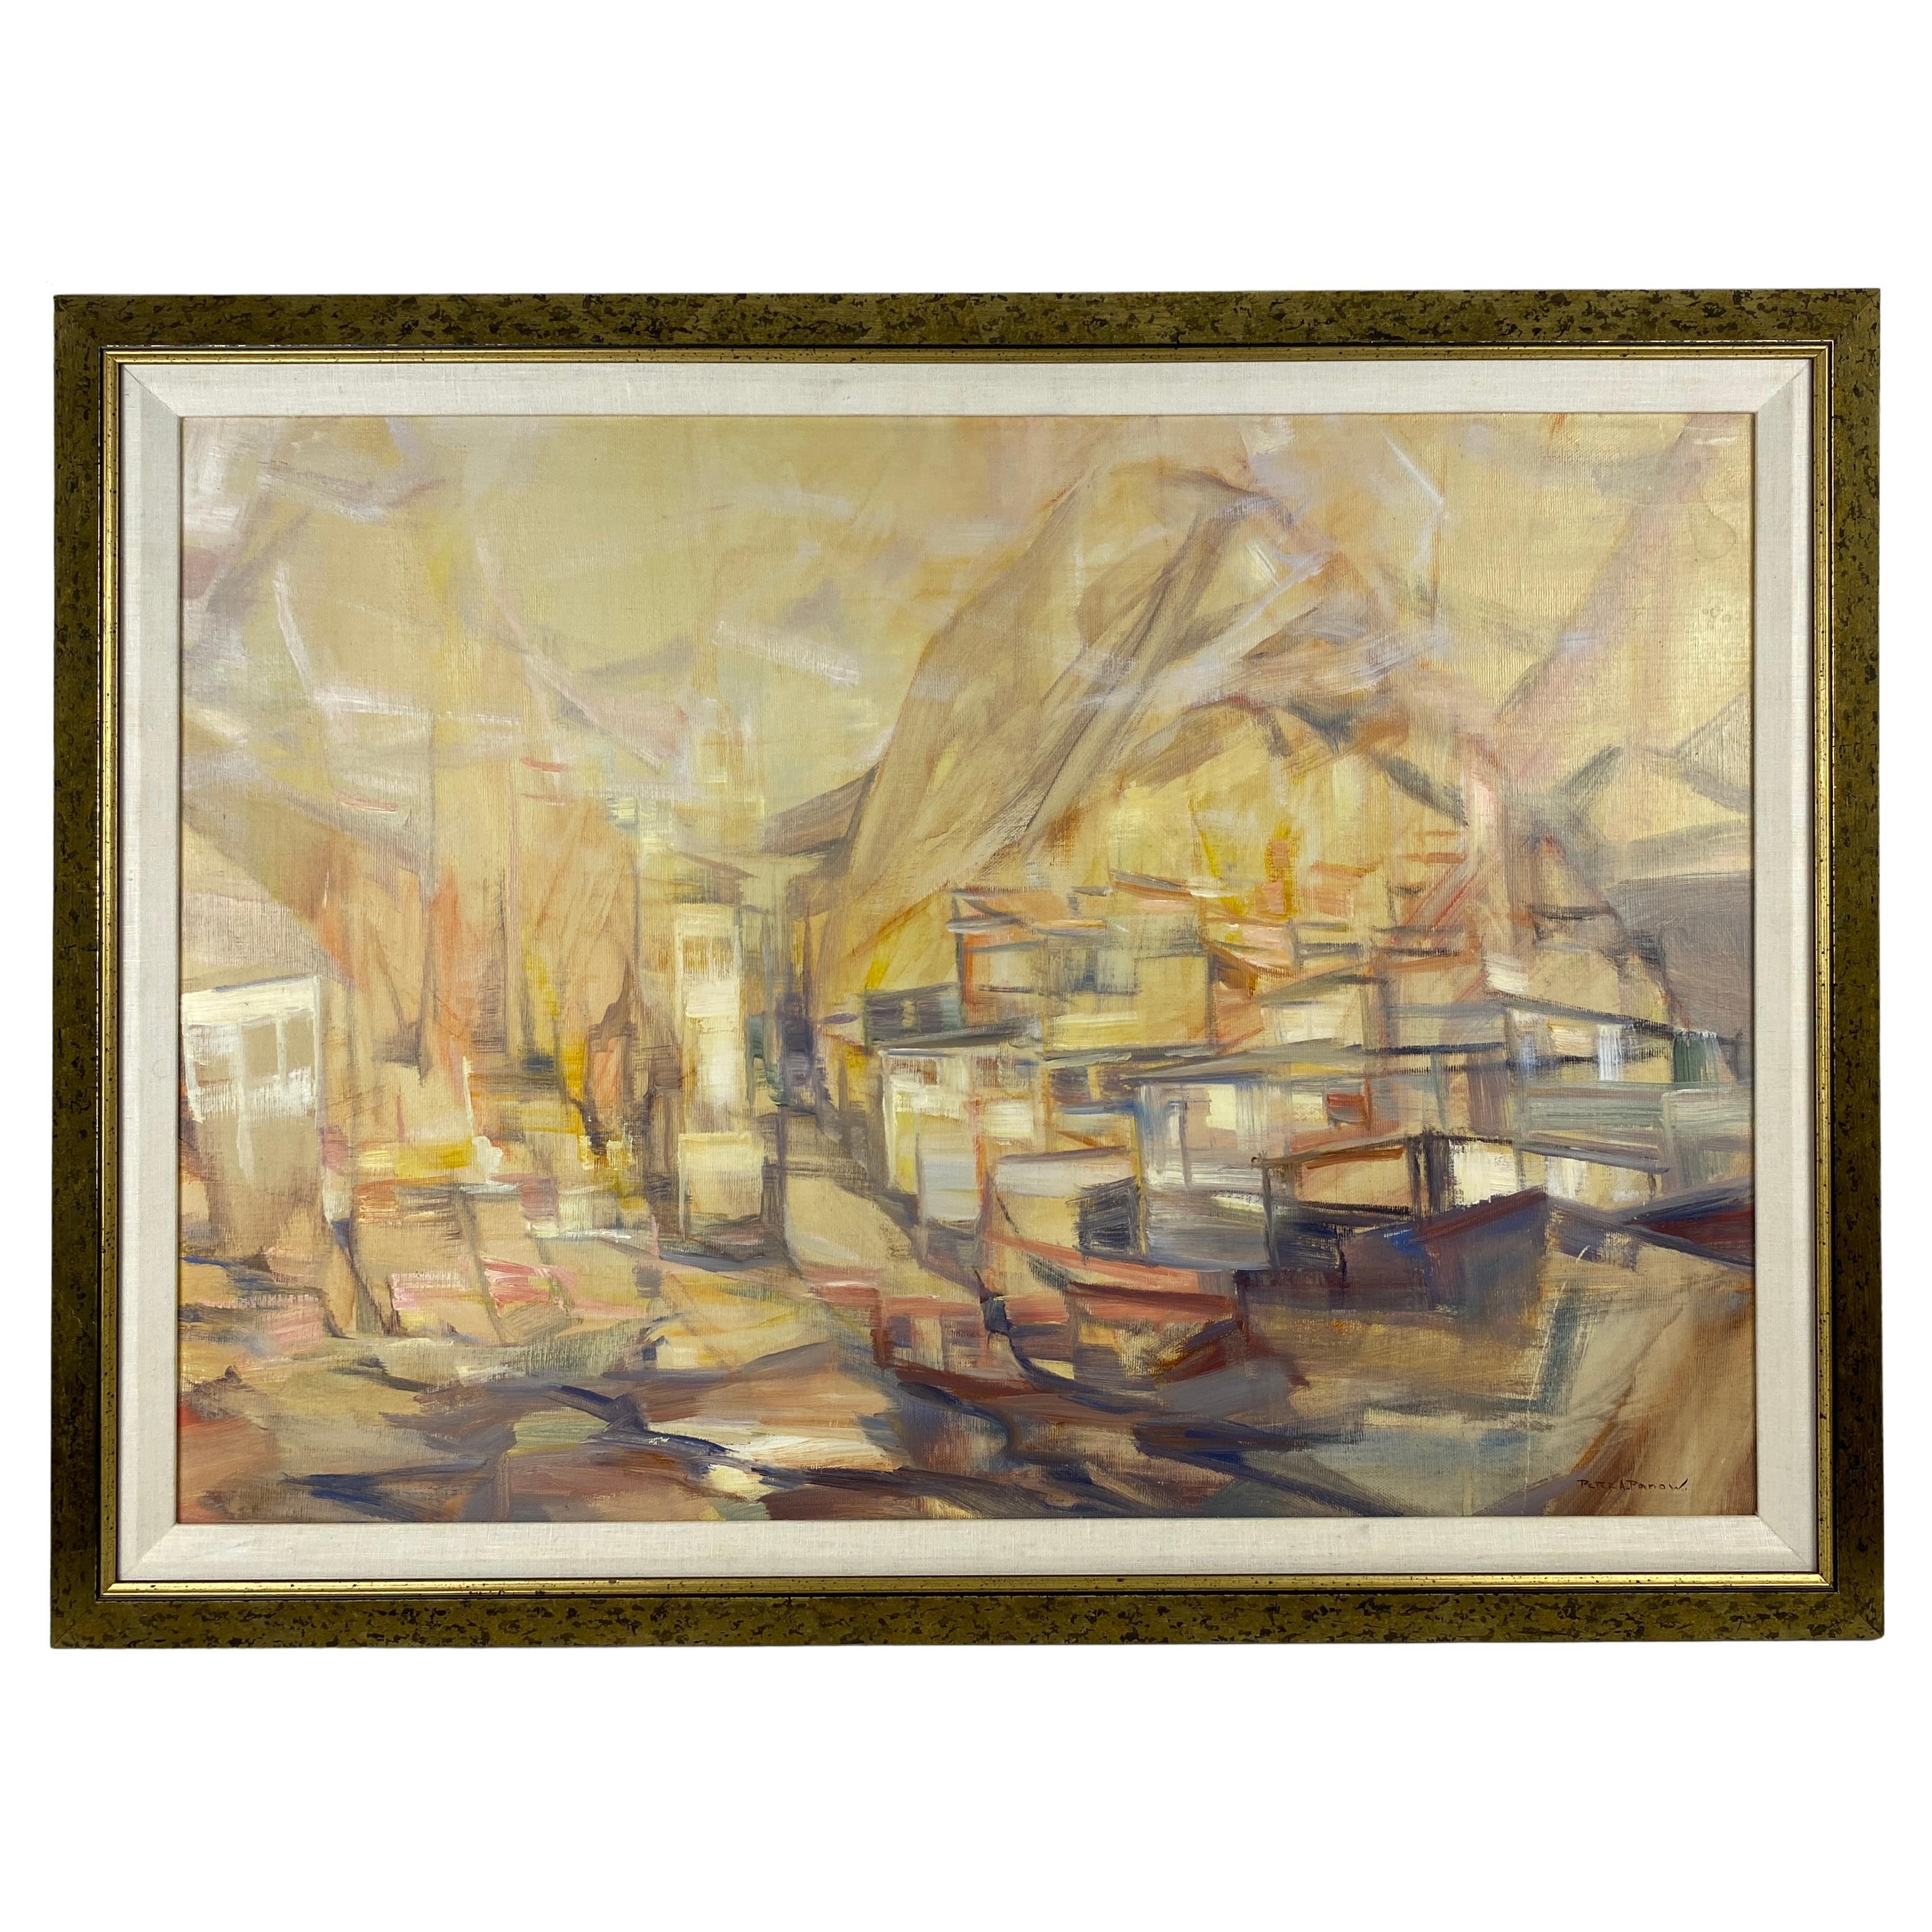 Abstract Cubist Seascape Oil on Canvas Painting by Peter a. Panow